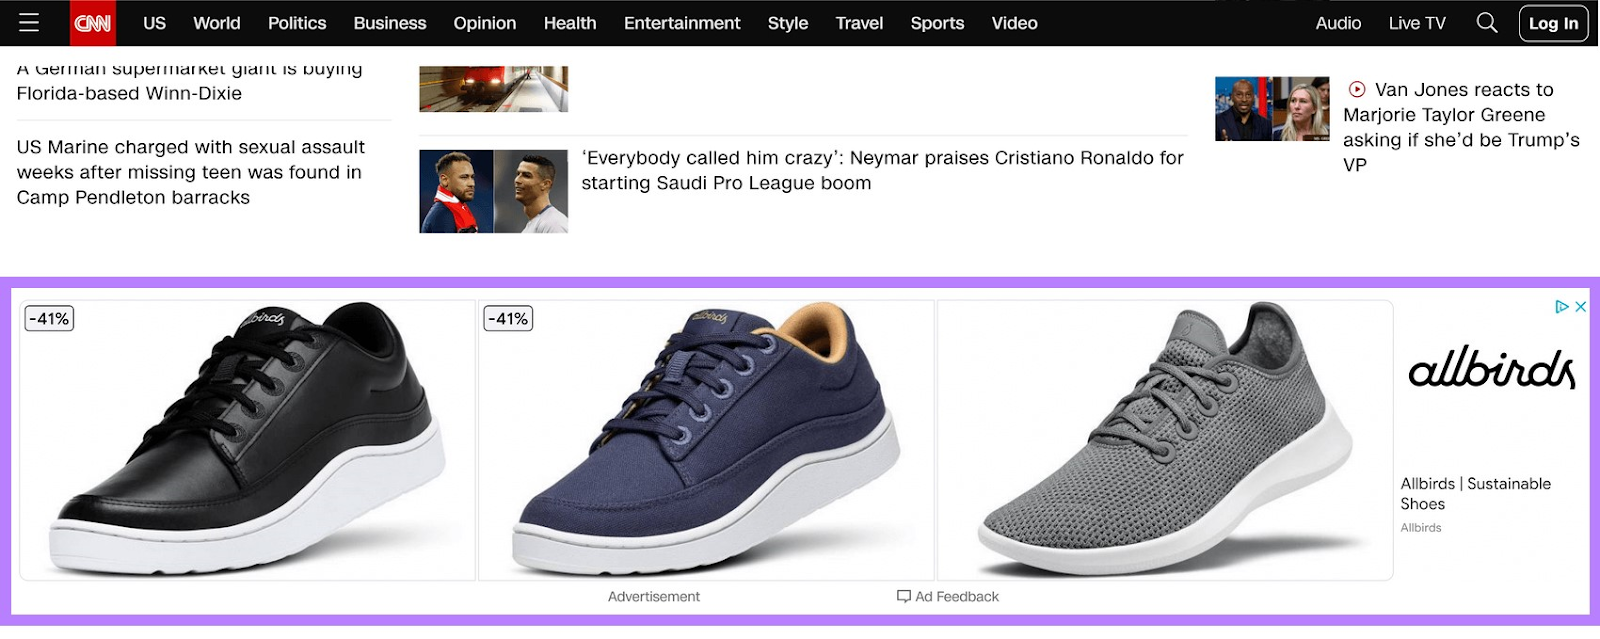 an example of shoes display ad on CNN page